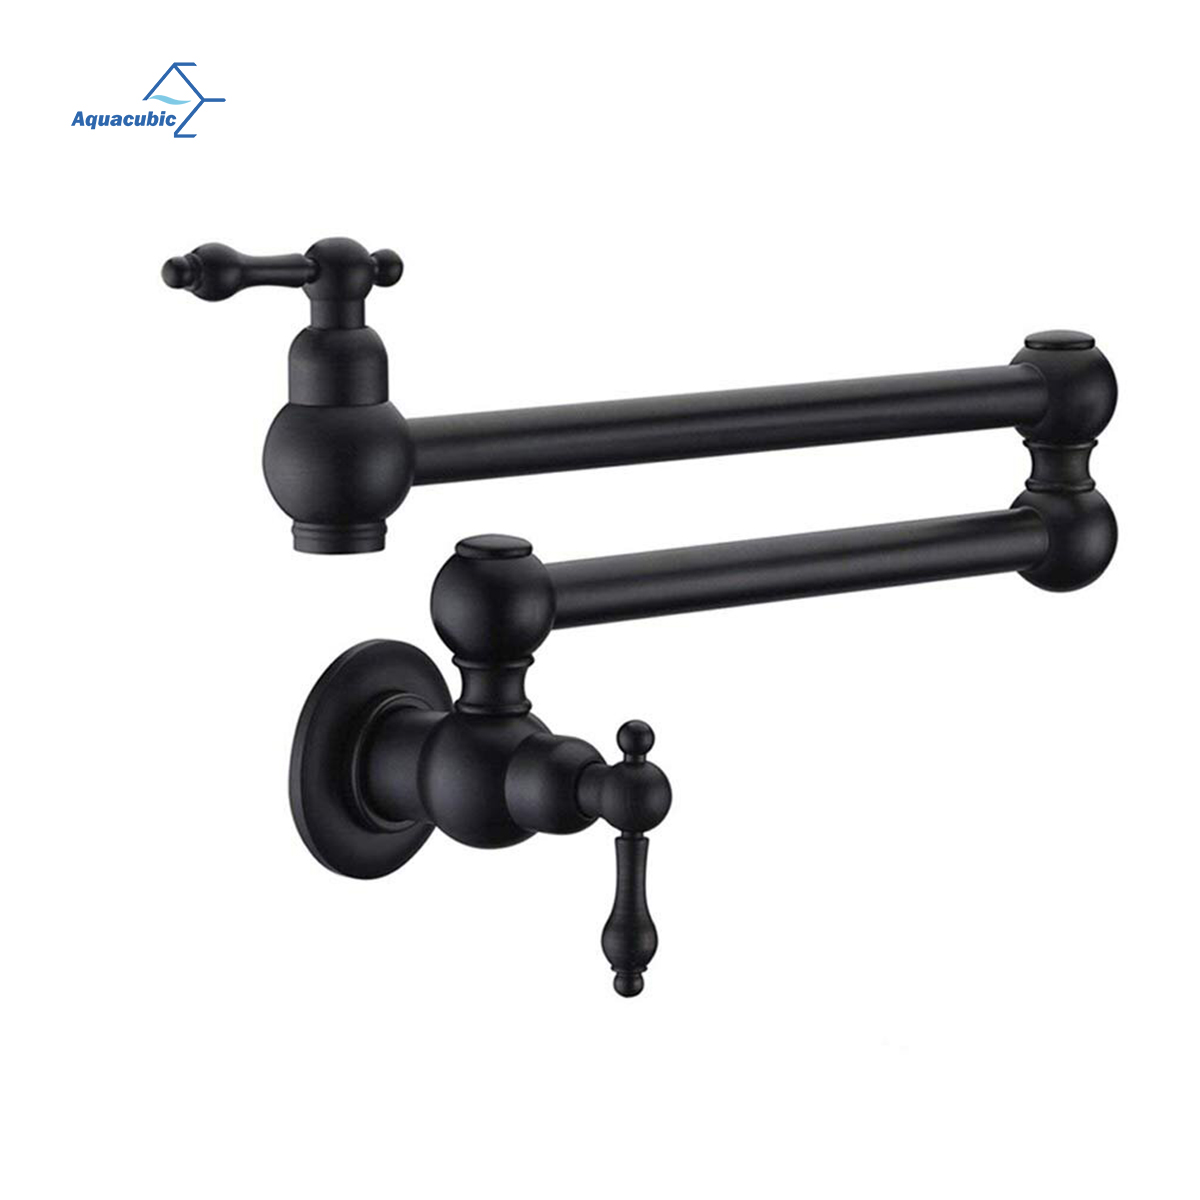 Aquacubic Black Pot Filler Faucet Wall Mount,Dual Swing Joints and 24" Extension